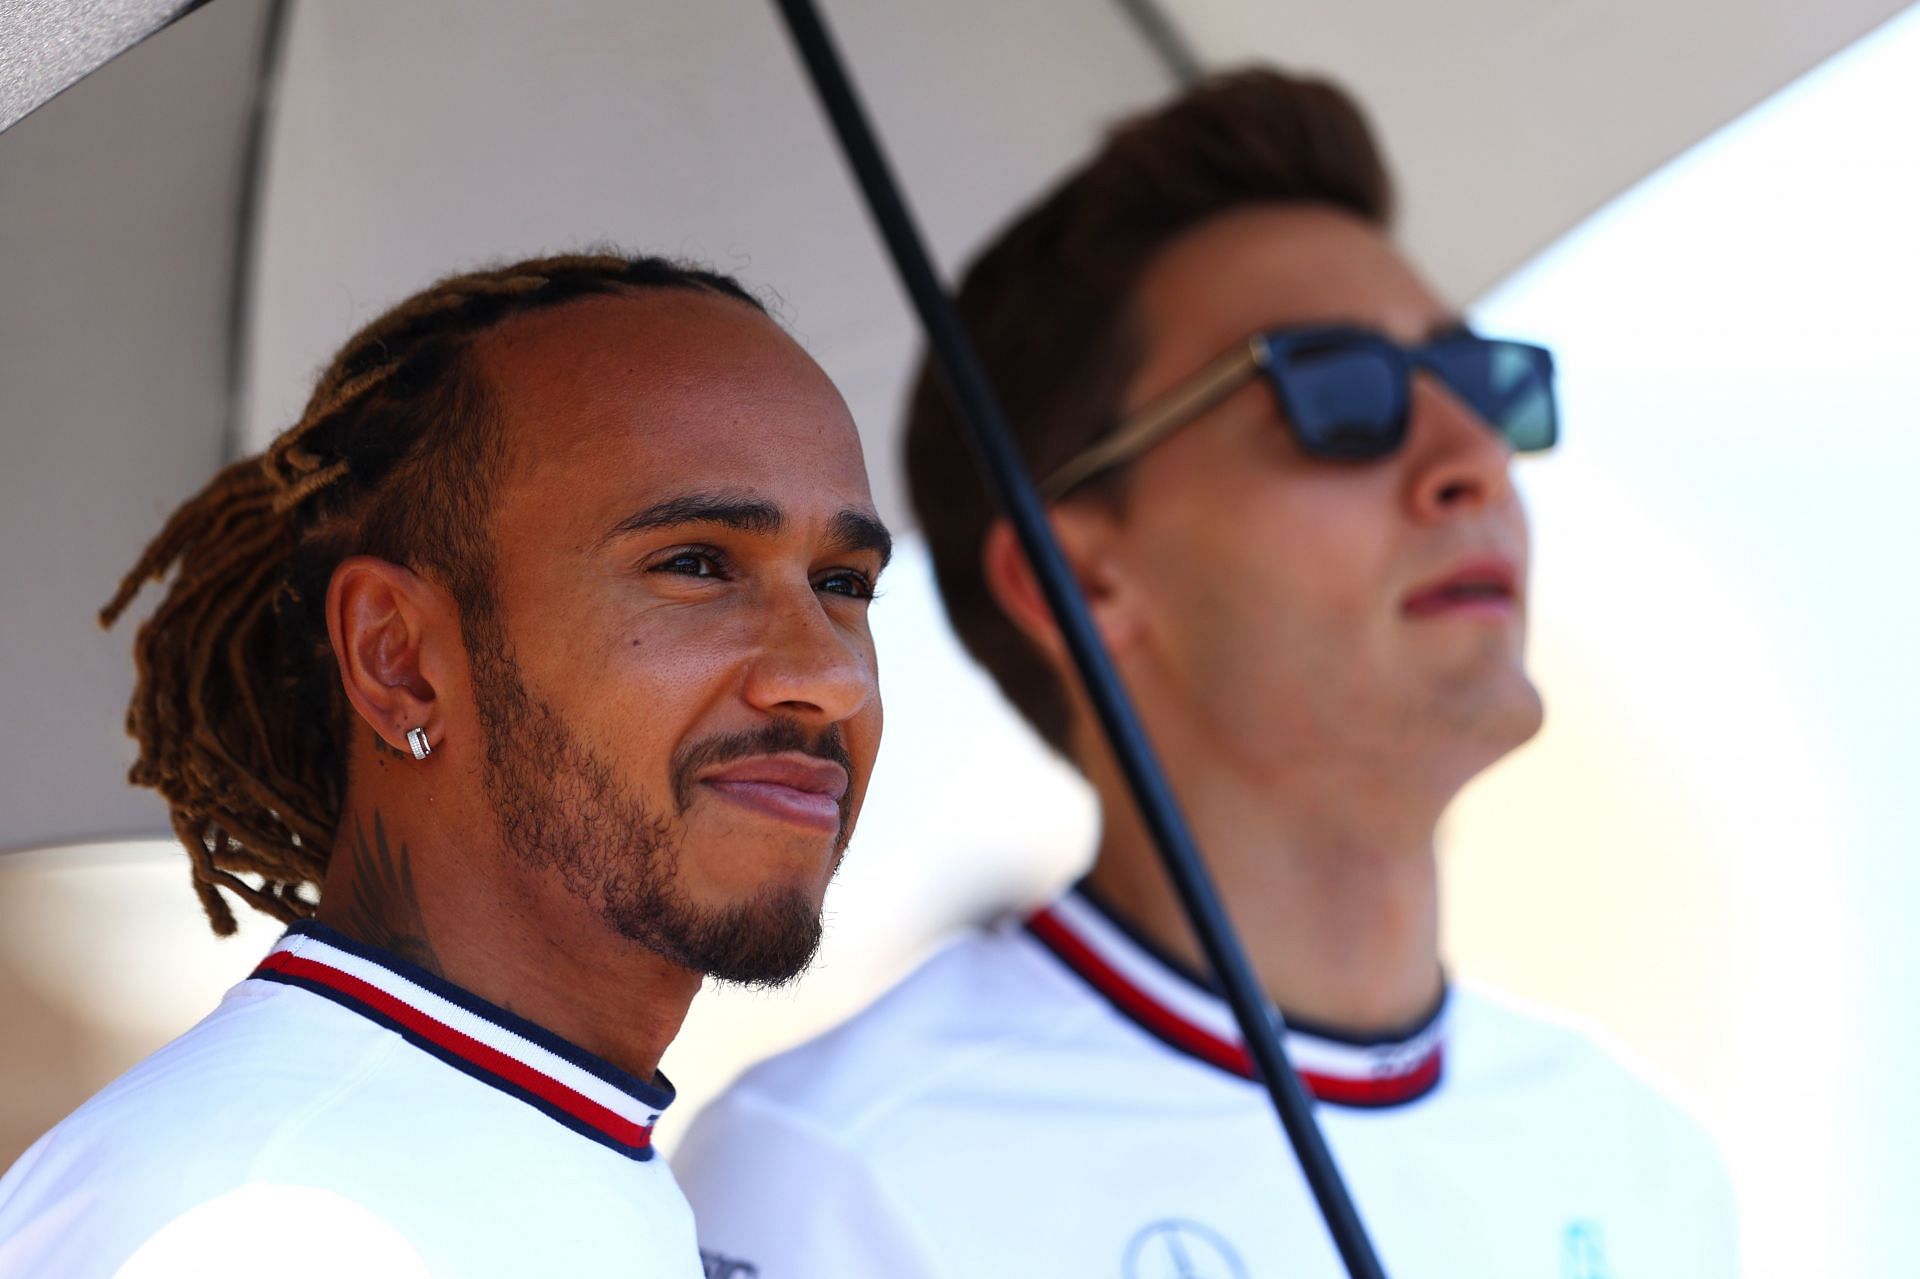 Lewis Hamilton (left) and George Russell (right) photographed before the 2022 F1 Azerbaijan GP (Photo by Clive Rose/Getty Images)